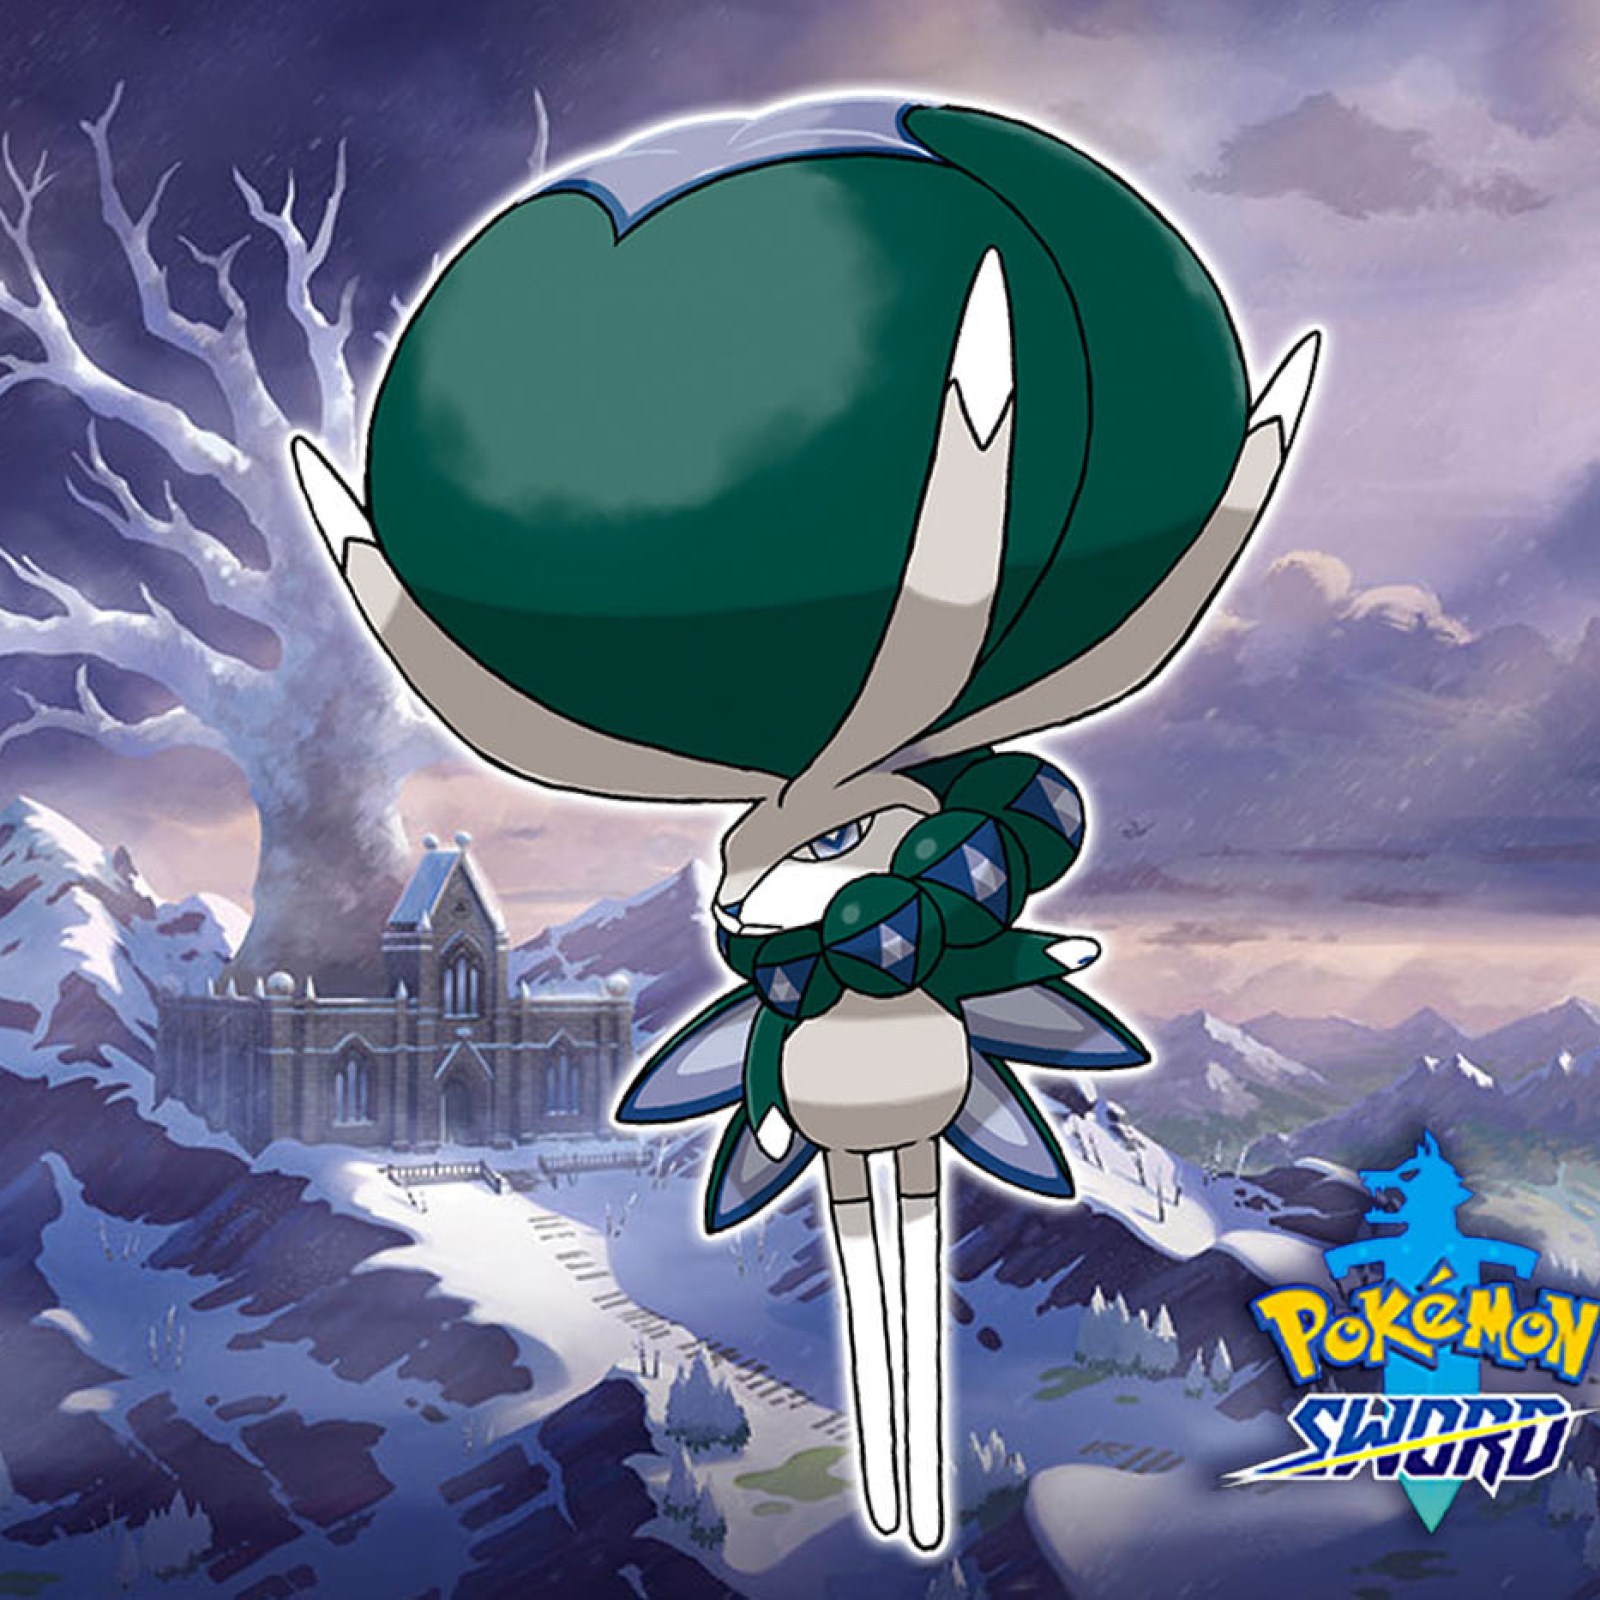 Legendary Pokemon in Sword and Shield The Crown Tundra Expansion